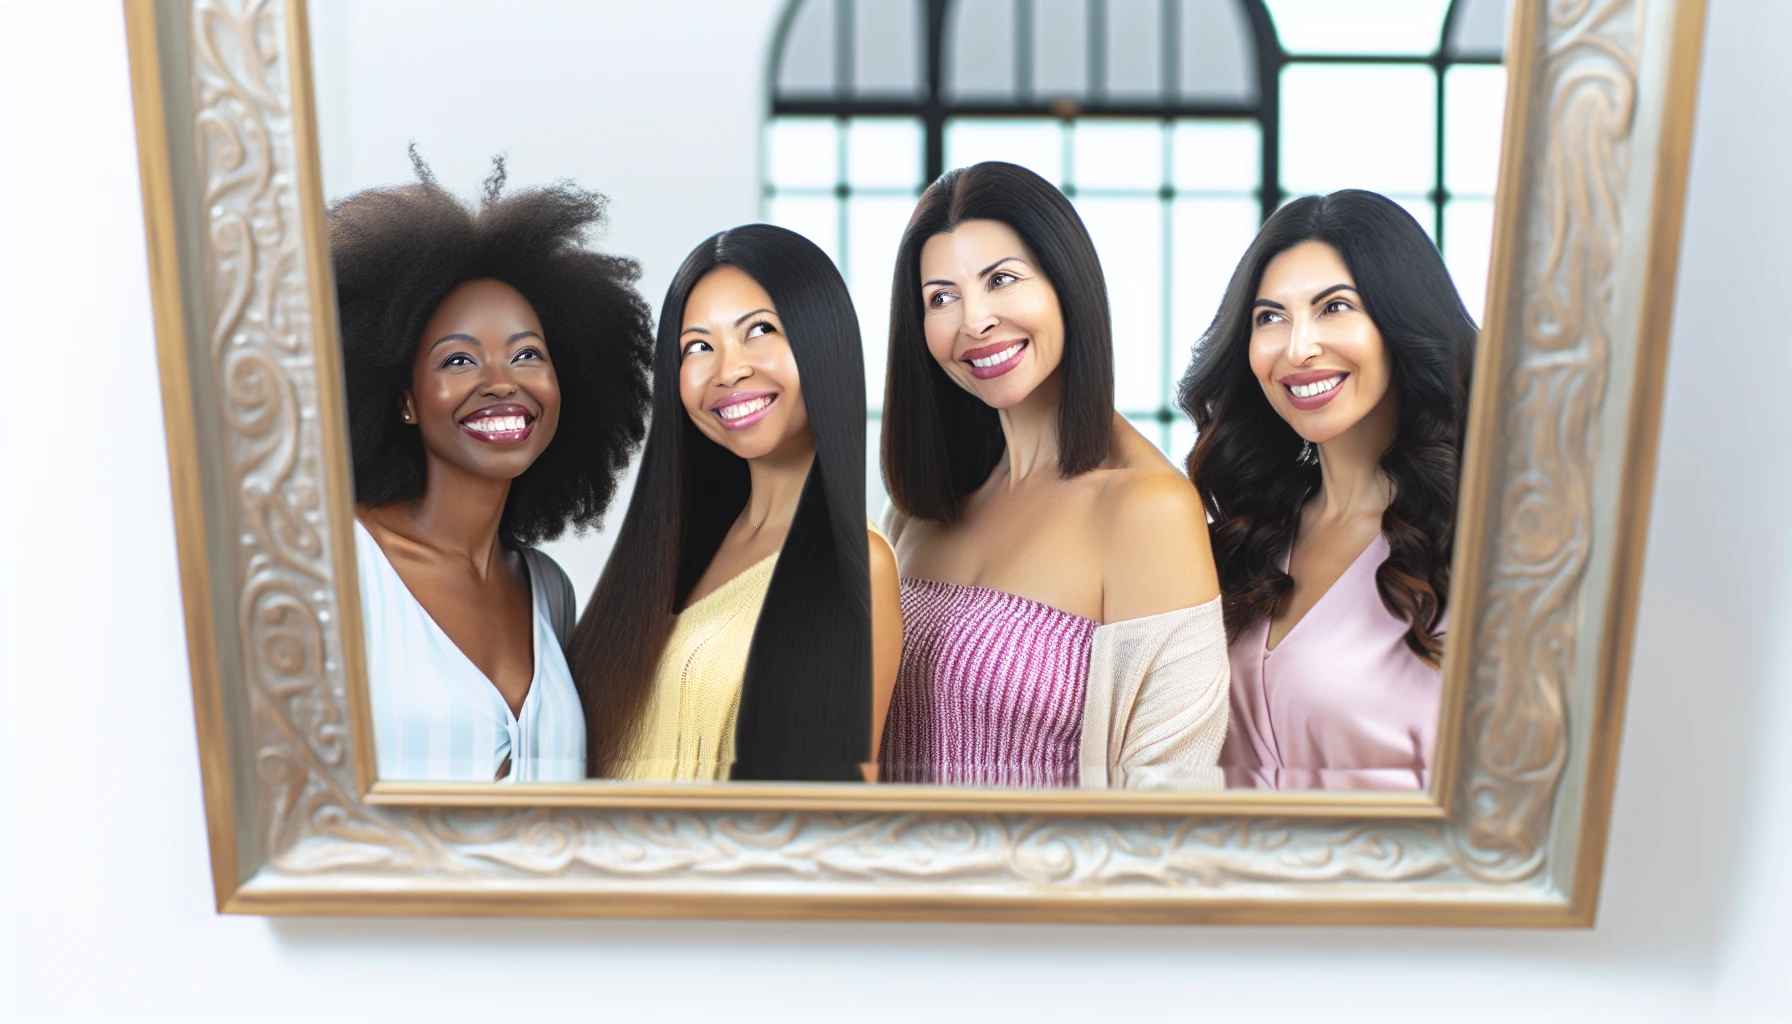 A group of women smiling and looking at their reflection in the mirror